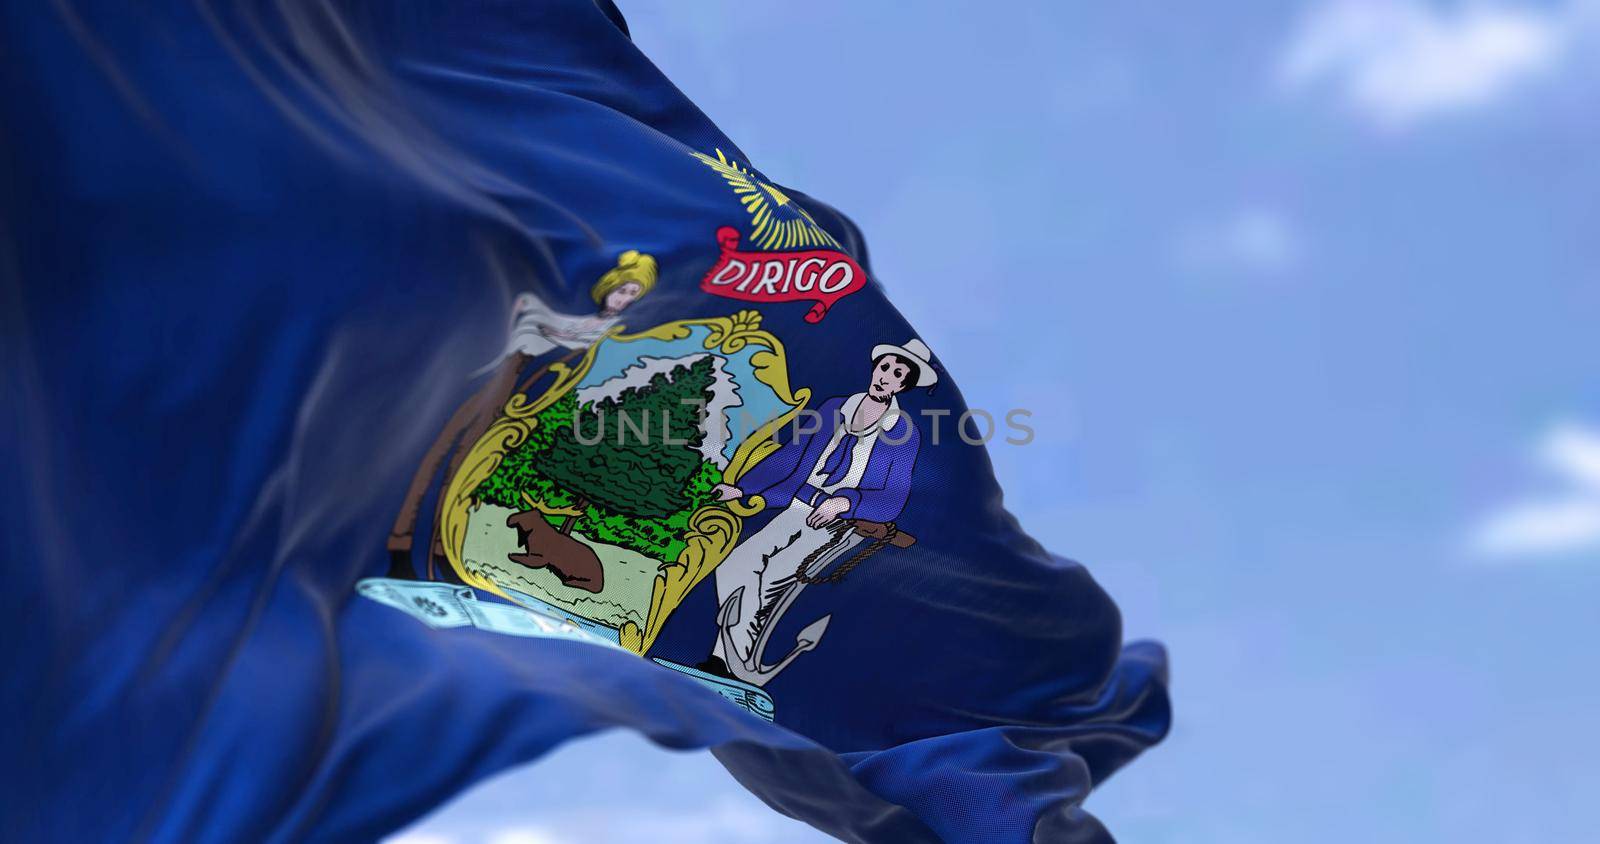 The US state flag of Maine waving in the wind. by rarrarorro